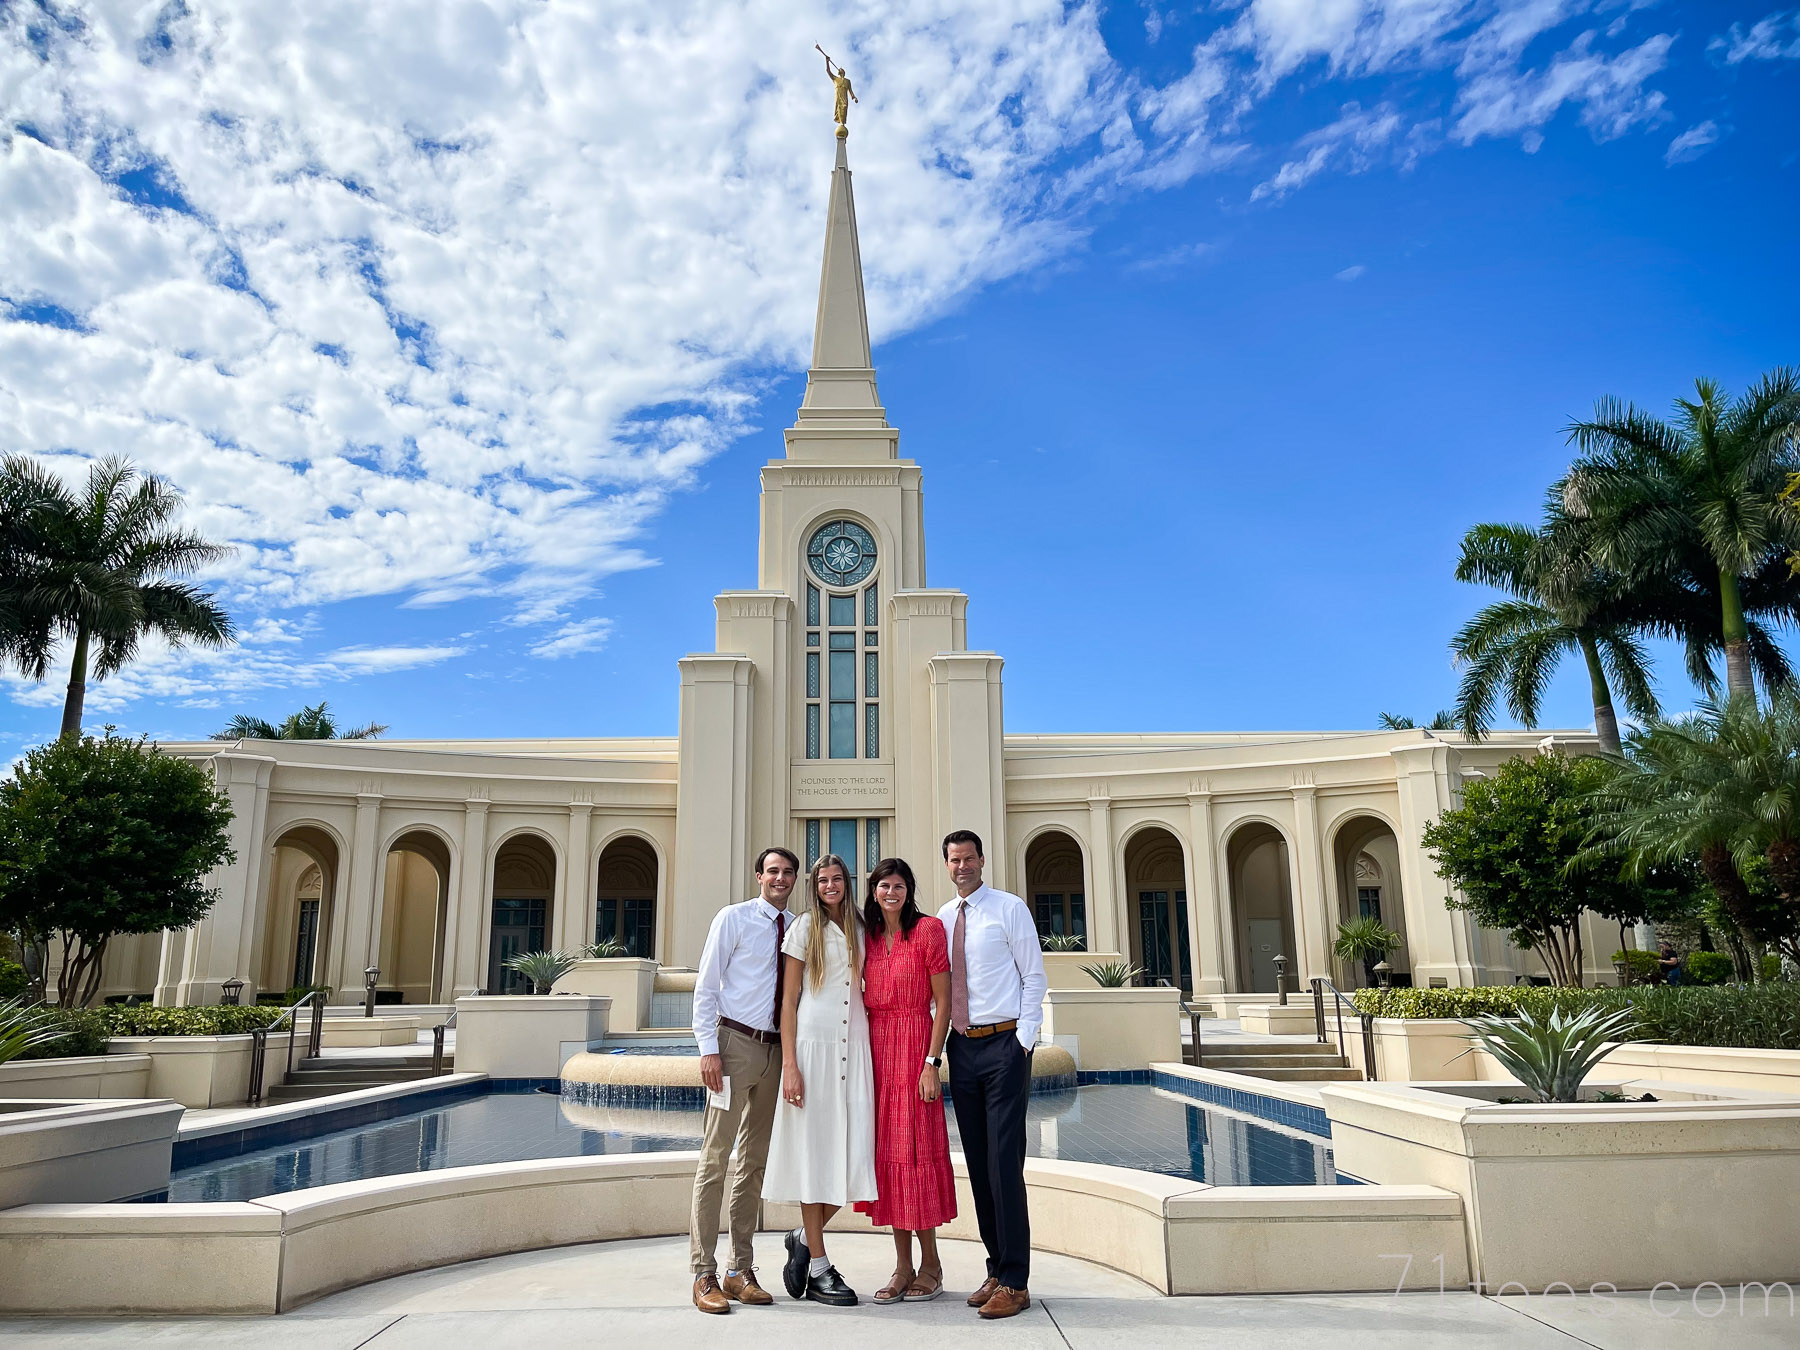 a visit to the temple in Florida with our girl